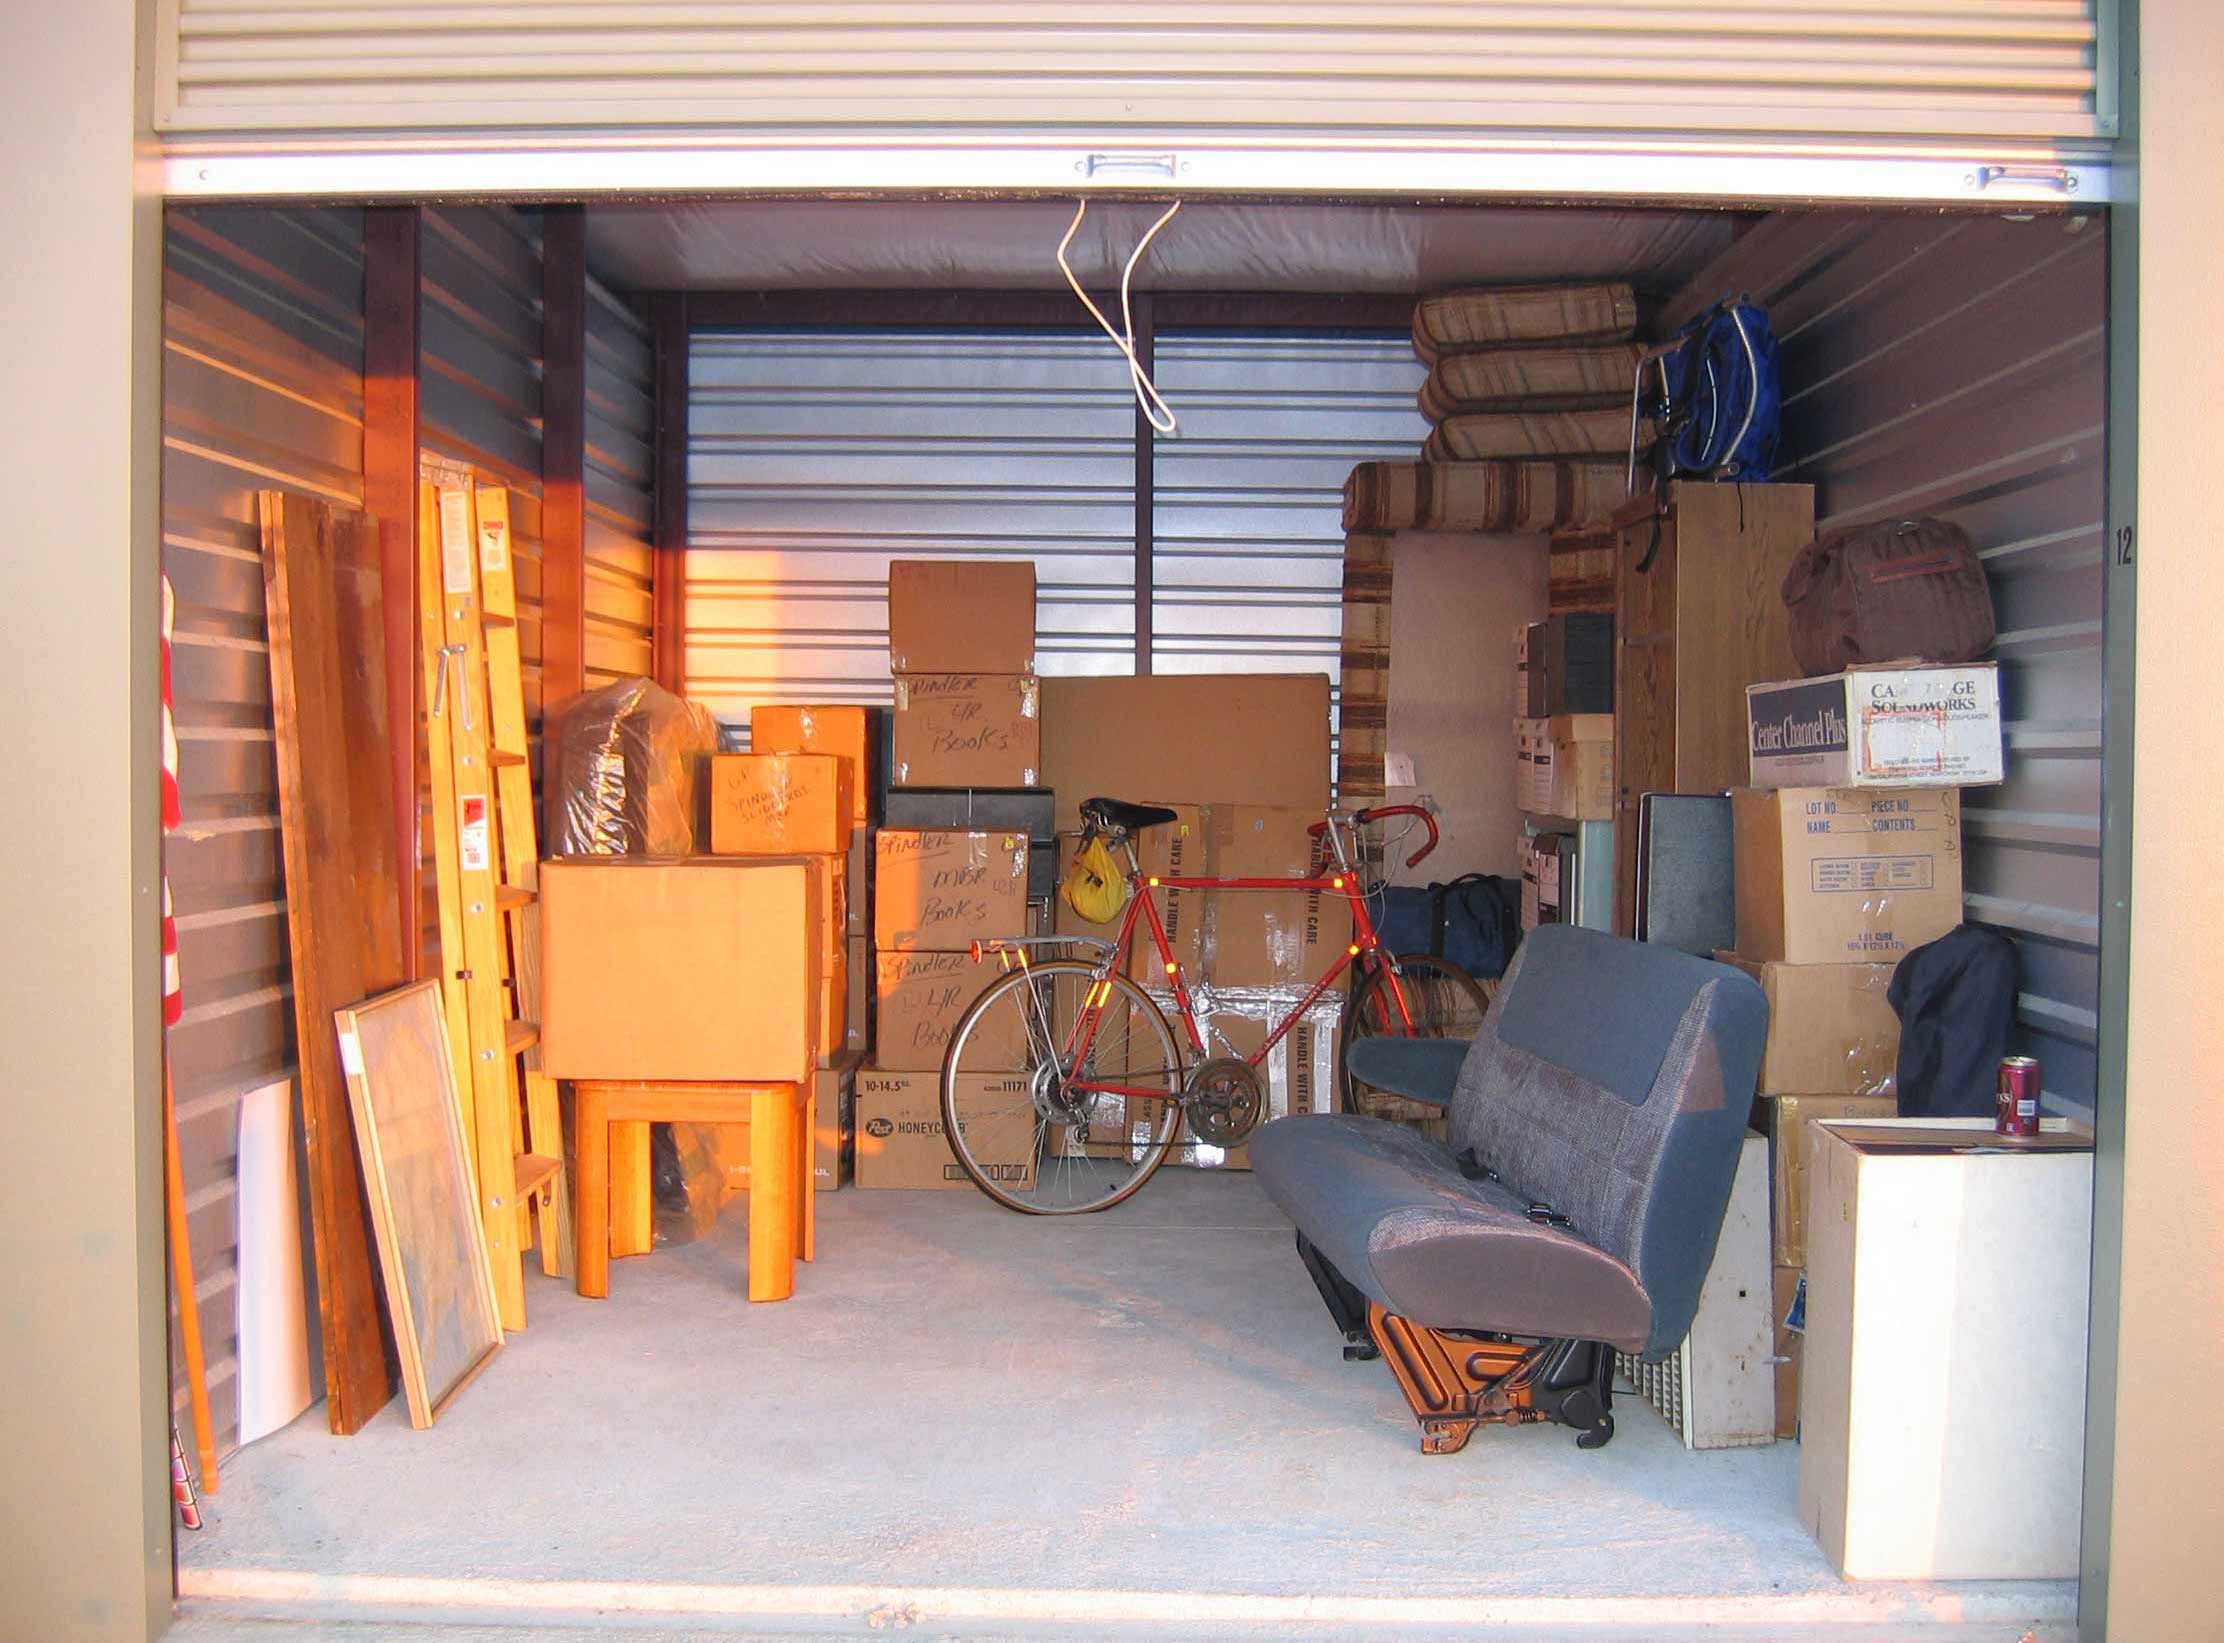 Renting Storage When Moving: Do You Really Need It?